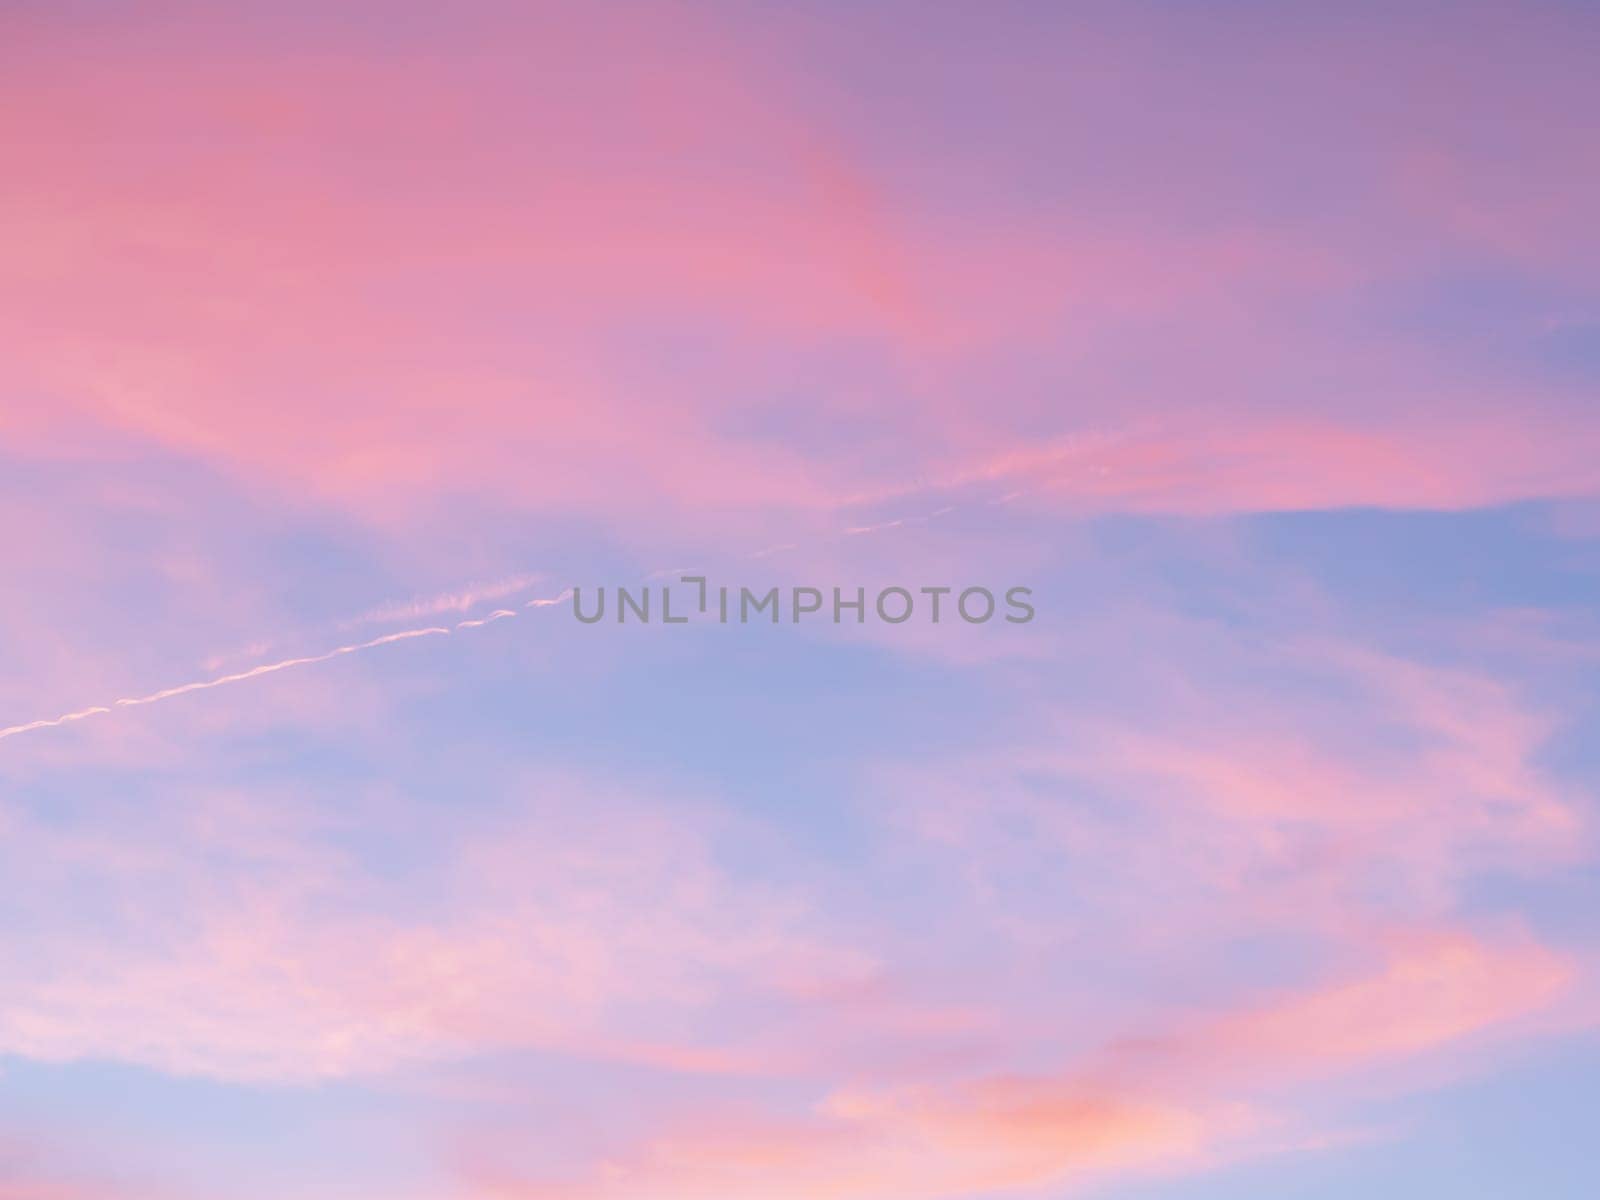 Fresh air, weather concept. Soft, fluffy and colorful cloud formation. Abstract idyllic pink and blue sky. Blur background texture of colorful sunset clouds. Twilight sky.